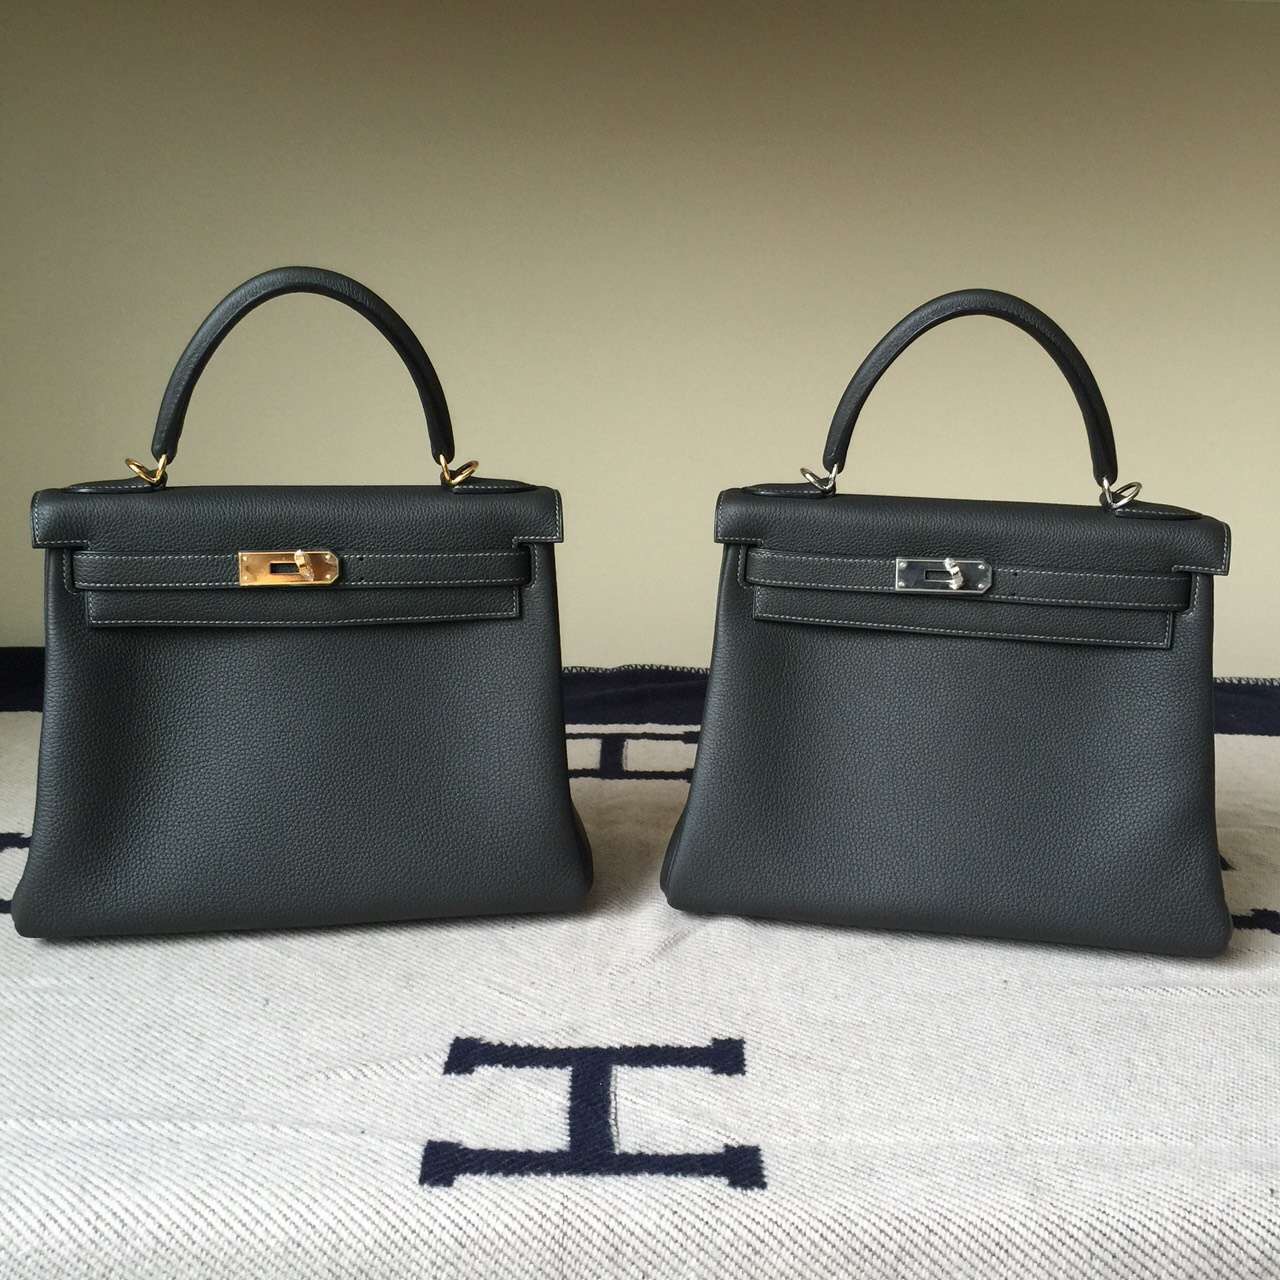 Hand Stitching Hermes Togo Leather Retourne Kelly28cm in Graphite grey